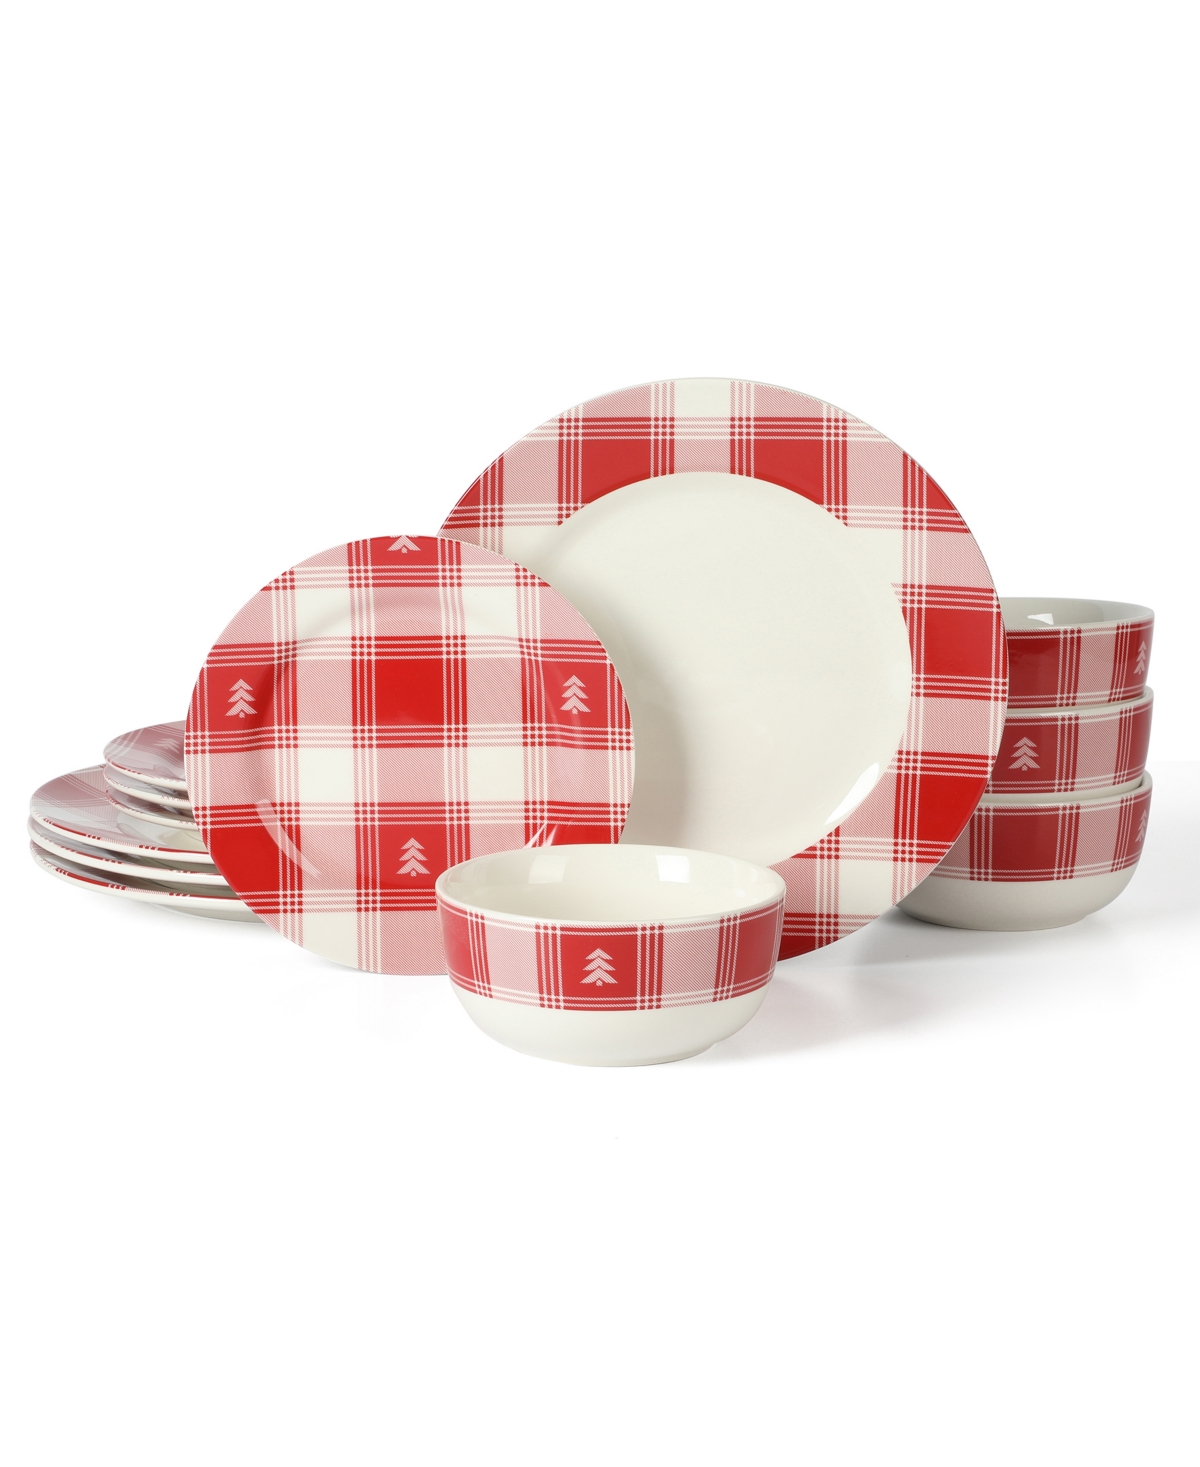 Plaid Decorated Red White 12 Piece Dinnerware Set, Service for 4 - White